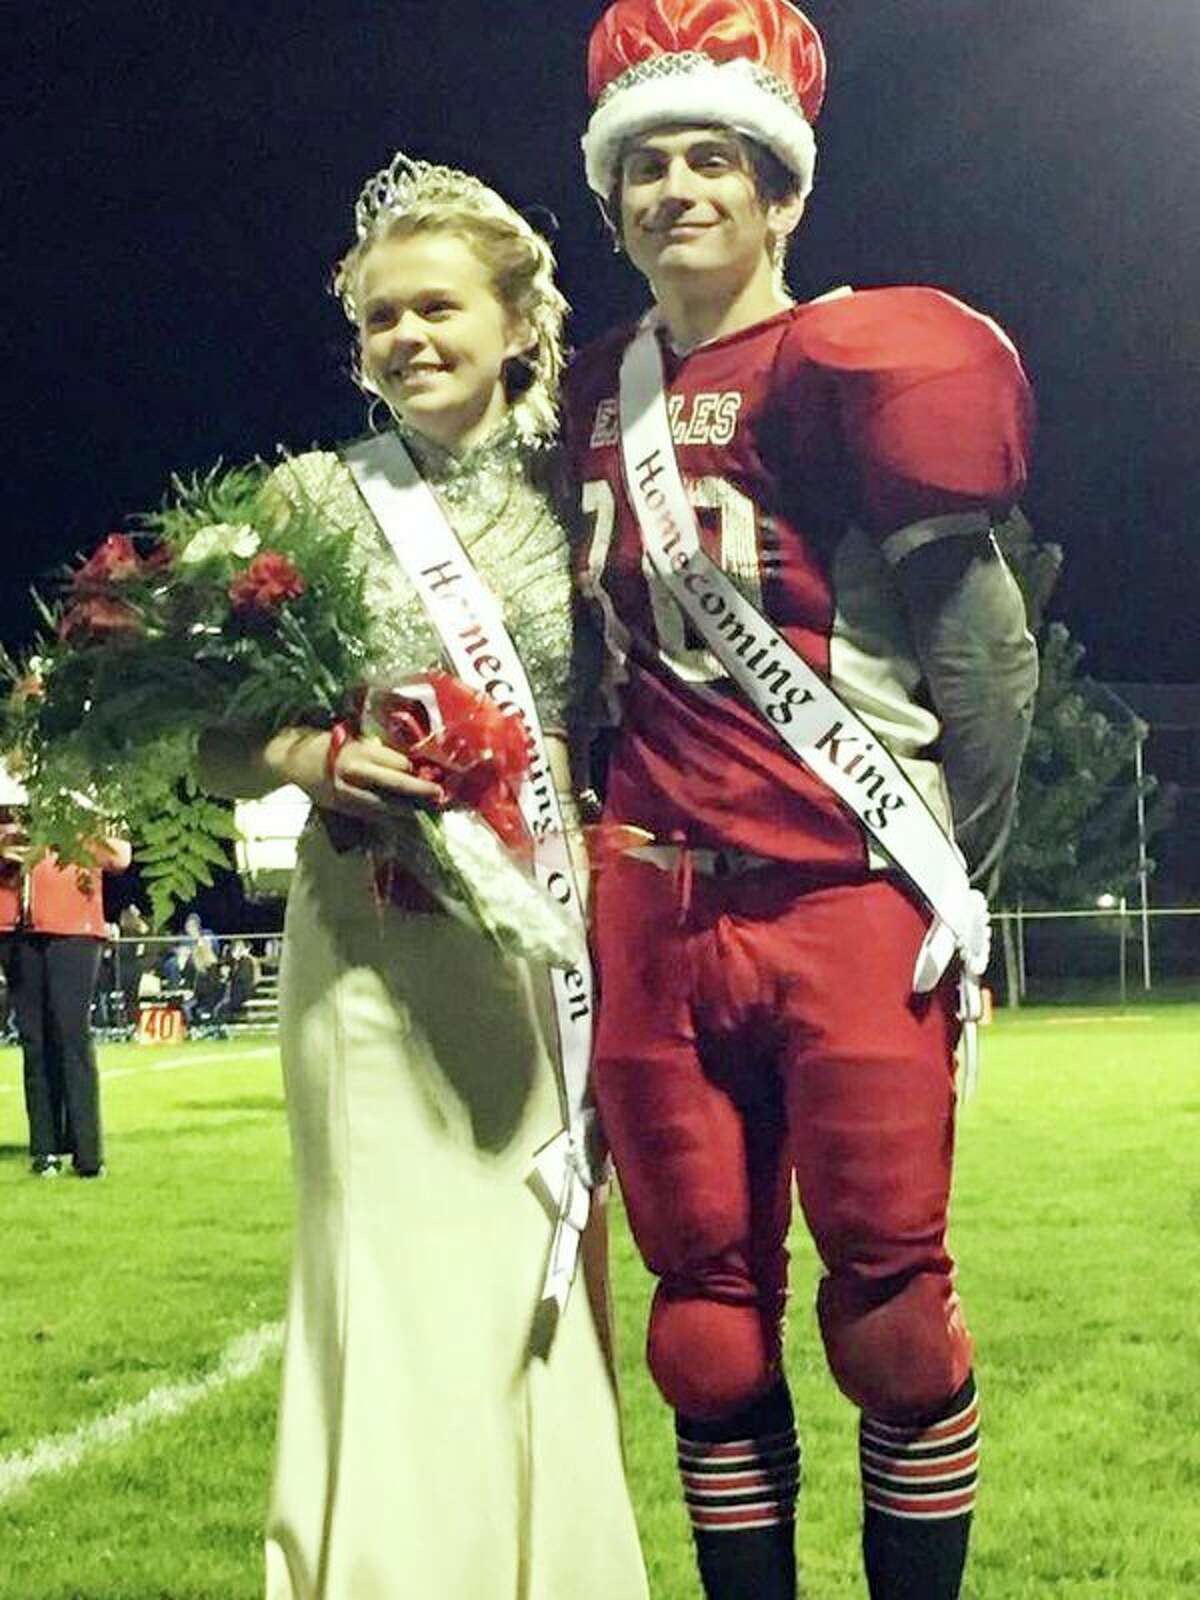 The 2018 Caseville Homecoming king and queen are Chance Shippey and Kaylin Ewald. (Submitted Photo)